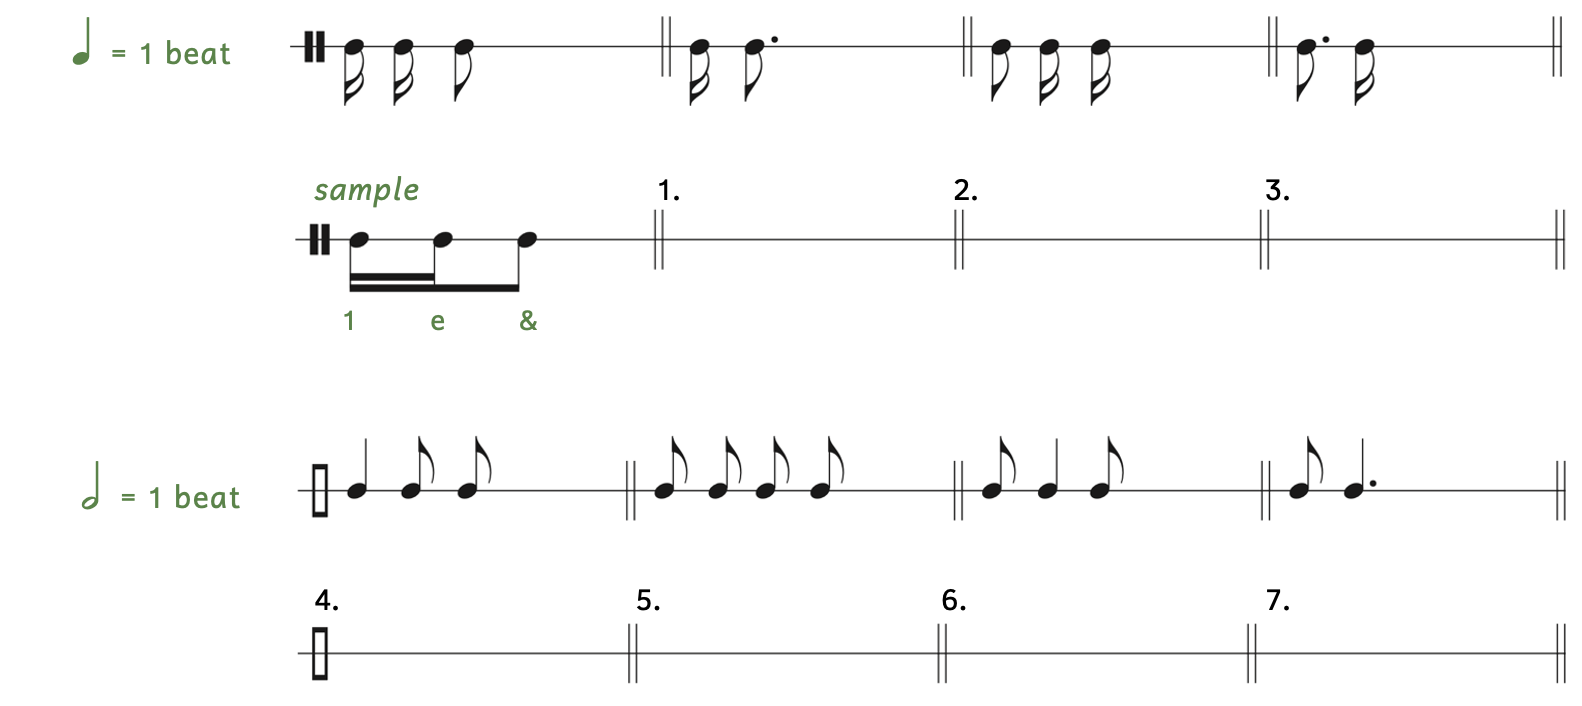 Beaming exercise. For numbers 1 through 3, the quarter note is equal to one beat. The given notes of the sample are two sixteenth notes and an eighth note. The sample's answer shows the two sixteenth notes and the eighth note beamed together. The notes are all equidistant. The rhythm syllables below the sample are "1, ee, and." Number 1 is a sixteenth note and dotted eighth note. Number 2 is an eighth note, and two sixteenth notes. Number 3 is a dotted eighth note and a sixteenth note. For numbers 4 through 7, the half note equals one beat. Number 4 is a quarter note followed by two eighth notes. Number 5 is four eighth notes. Number 6 is an eighth note, quarter note, and eighth note. Number 7 is an eighth note followed by a dotted quarter note.